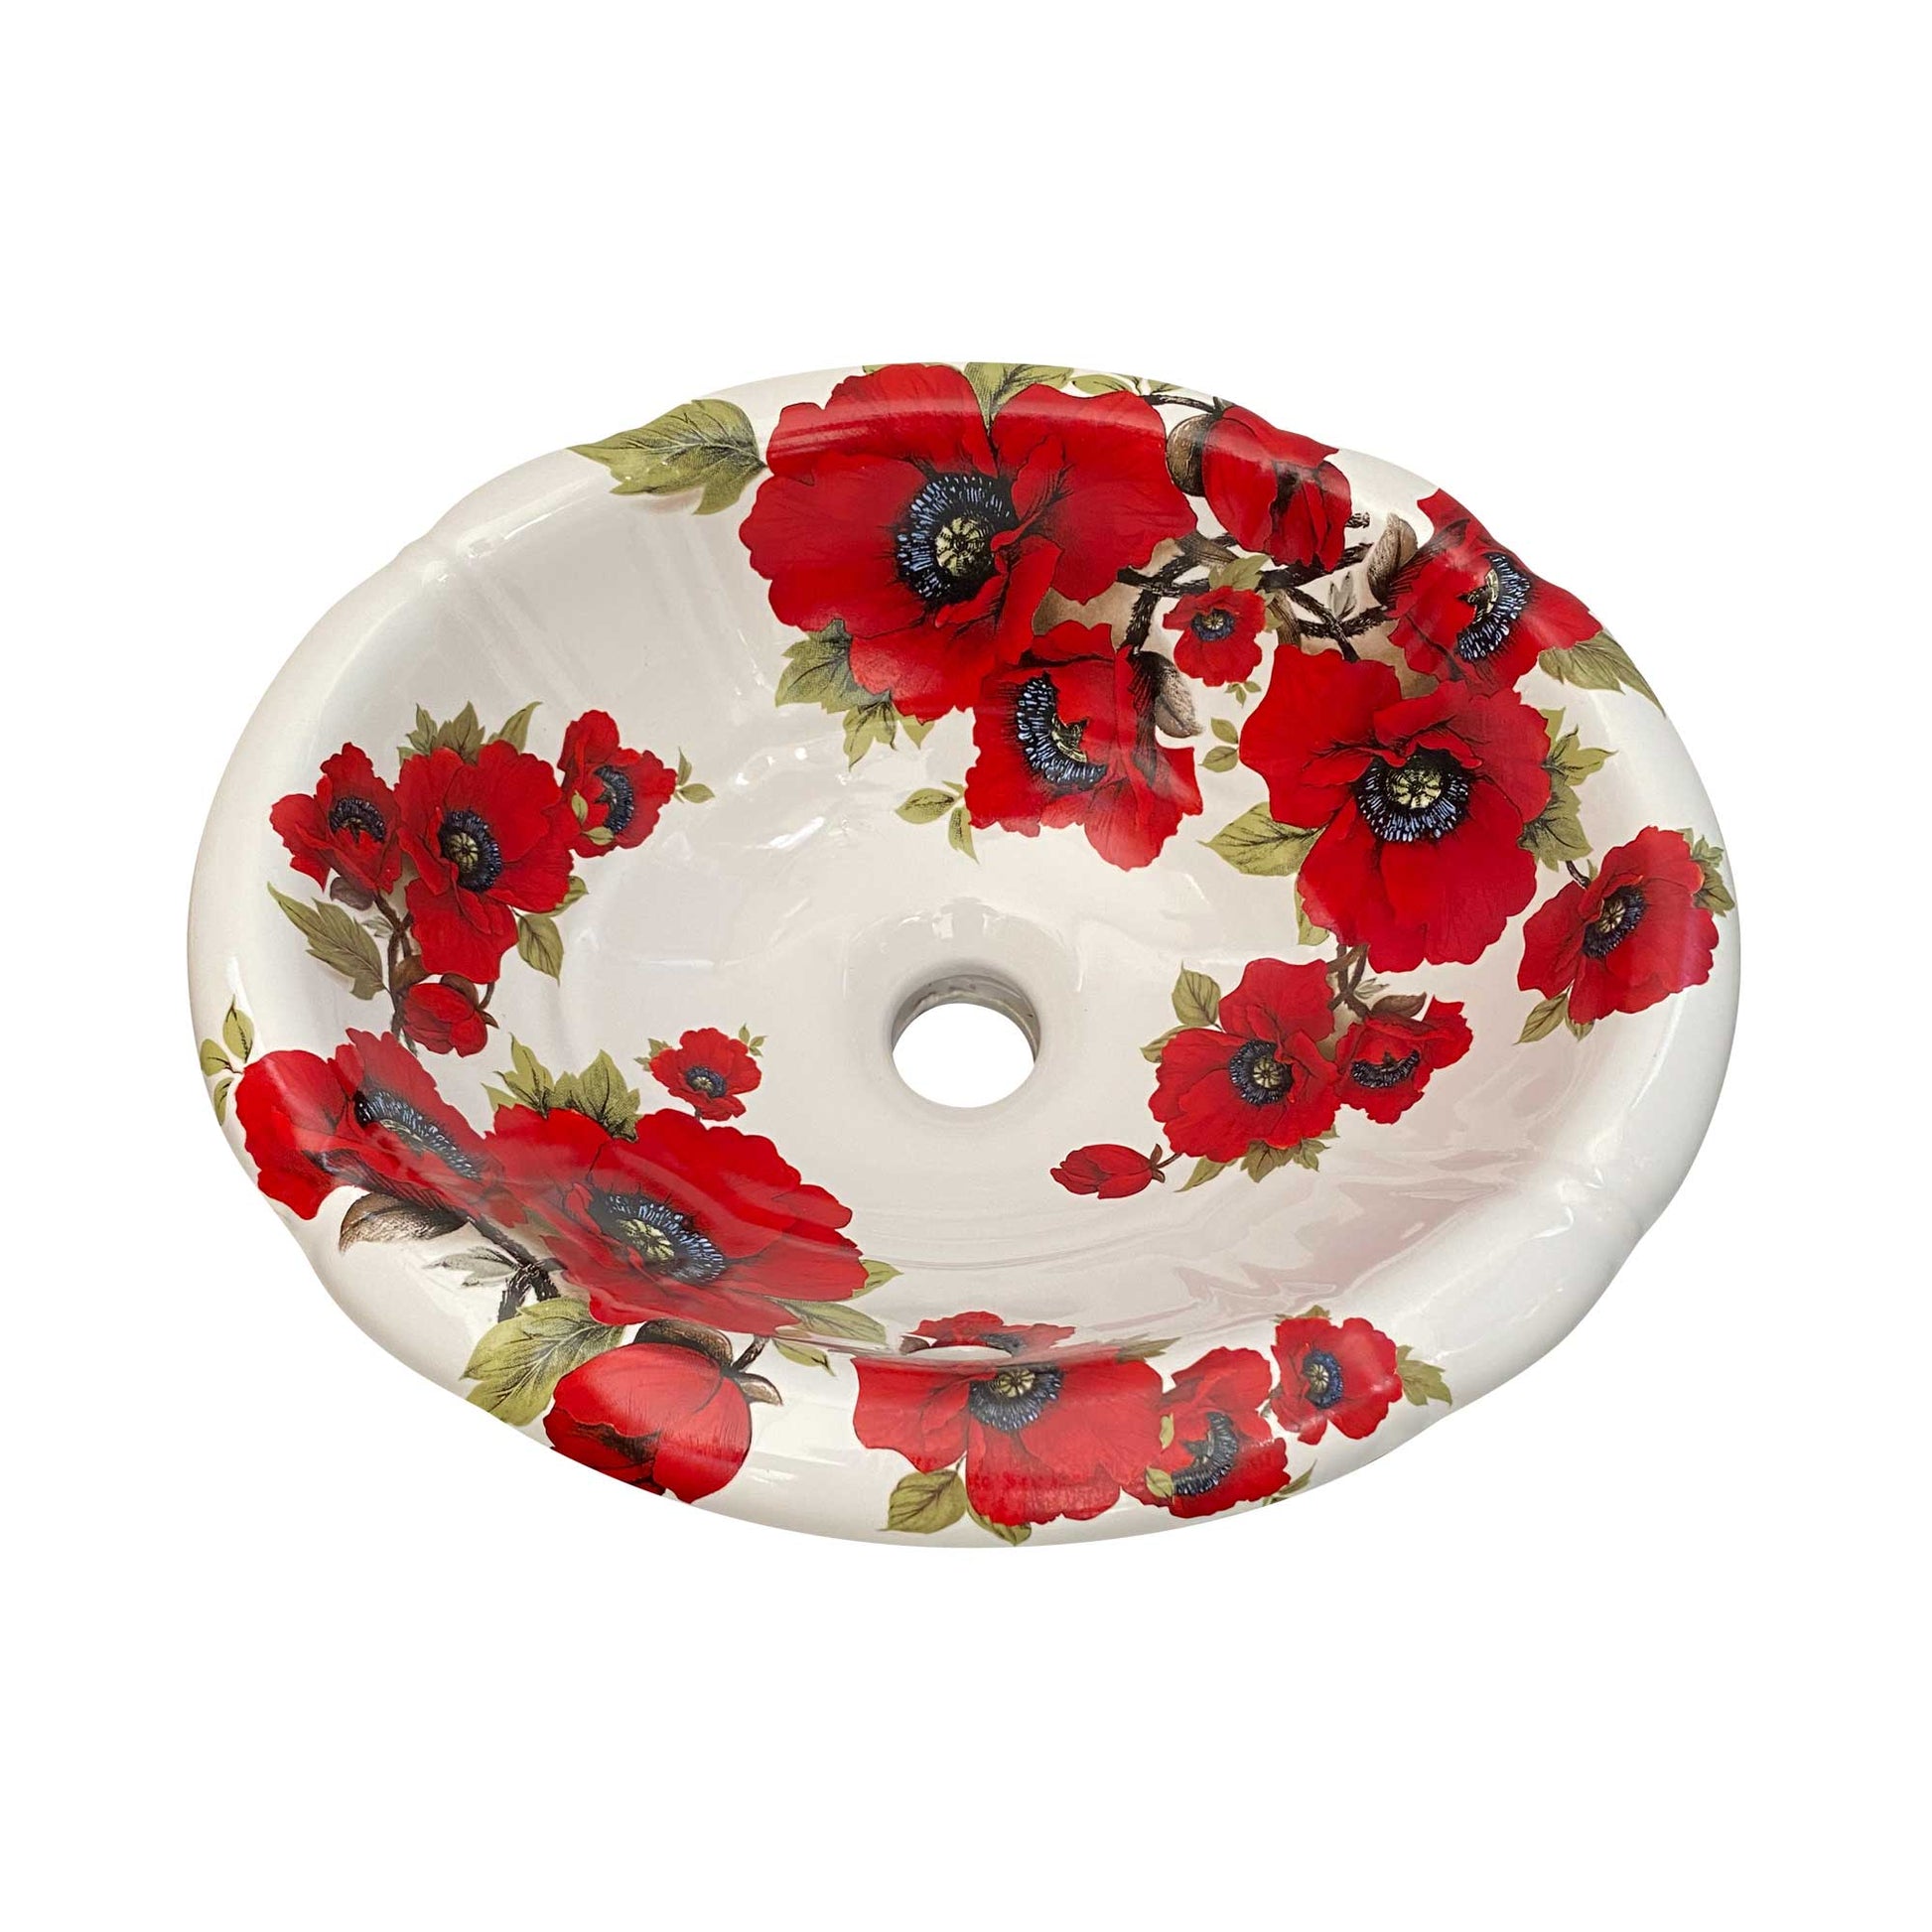 Barclay Sienna Drop-in bathroom sink painted with red poppies.